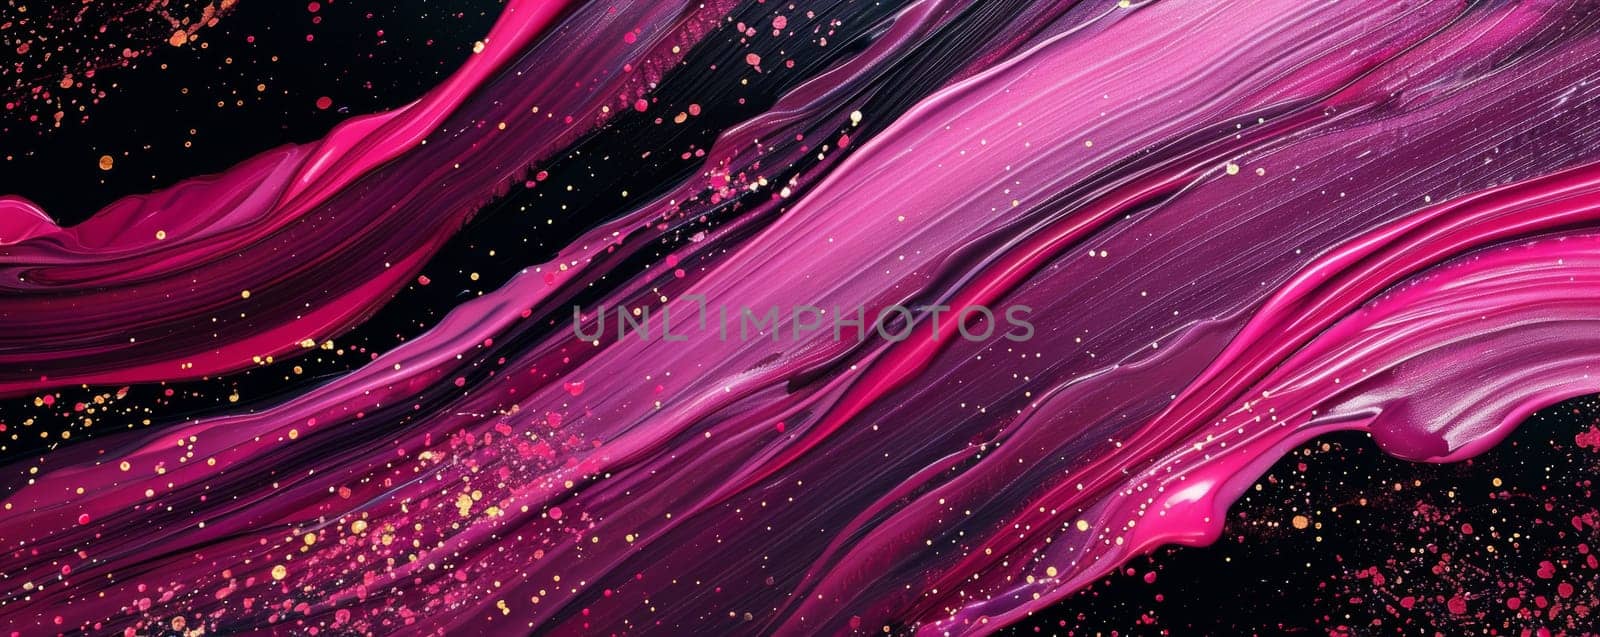 Black and Pink Abstract Painting With Paint Splatters by Anastasiia